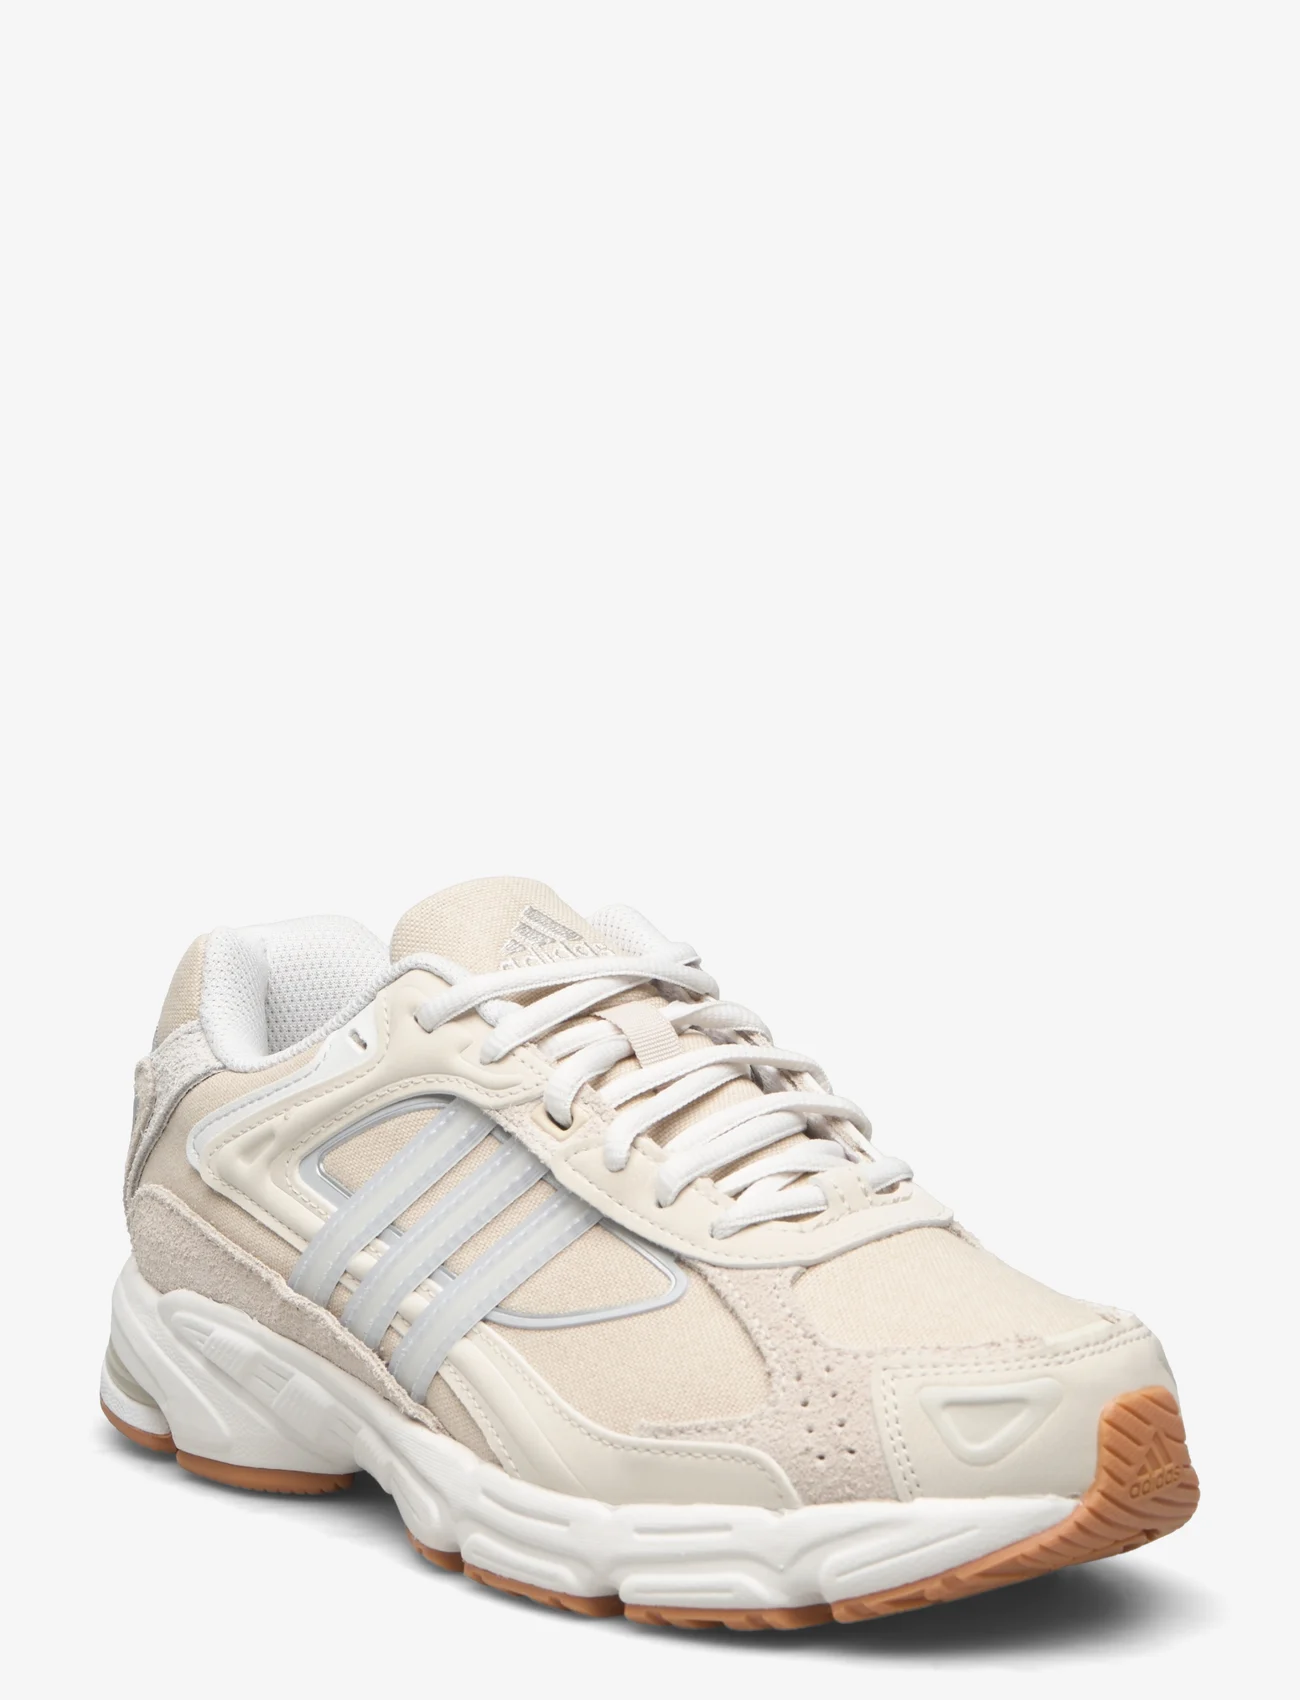 adidas Originals - RESPONSE CL W - chunky sneakers - alumin/crywht/cwhite - 0